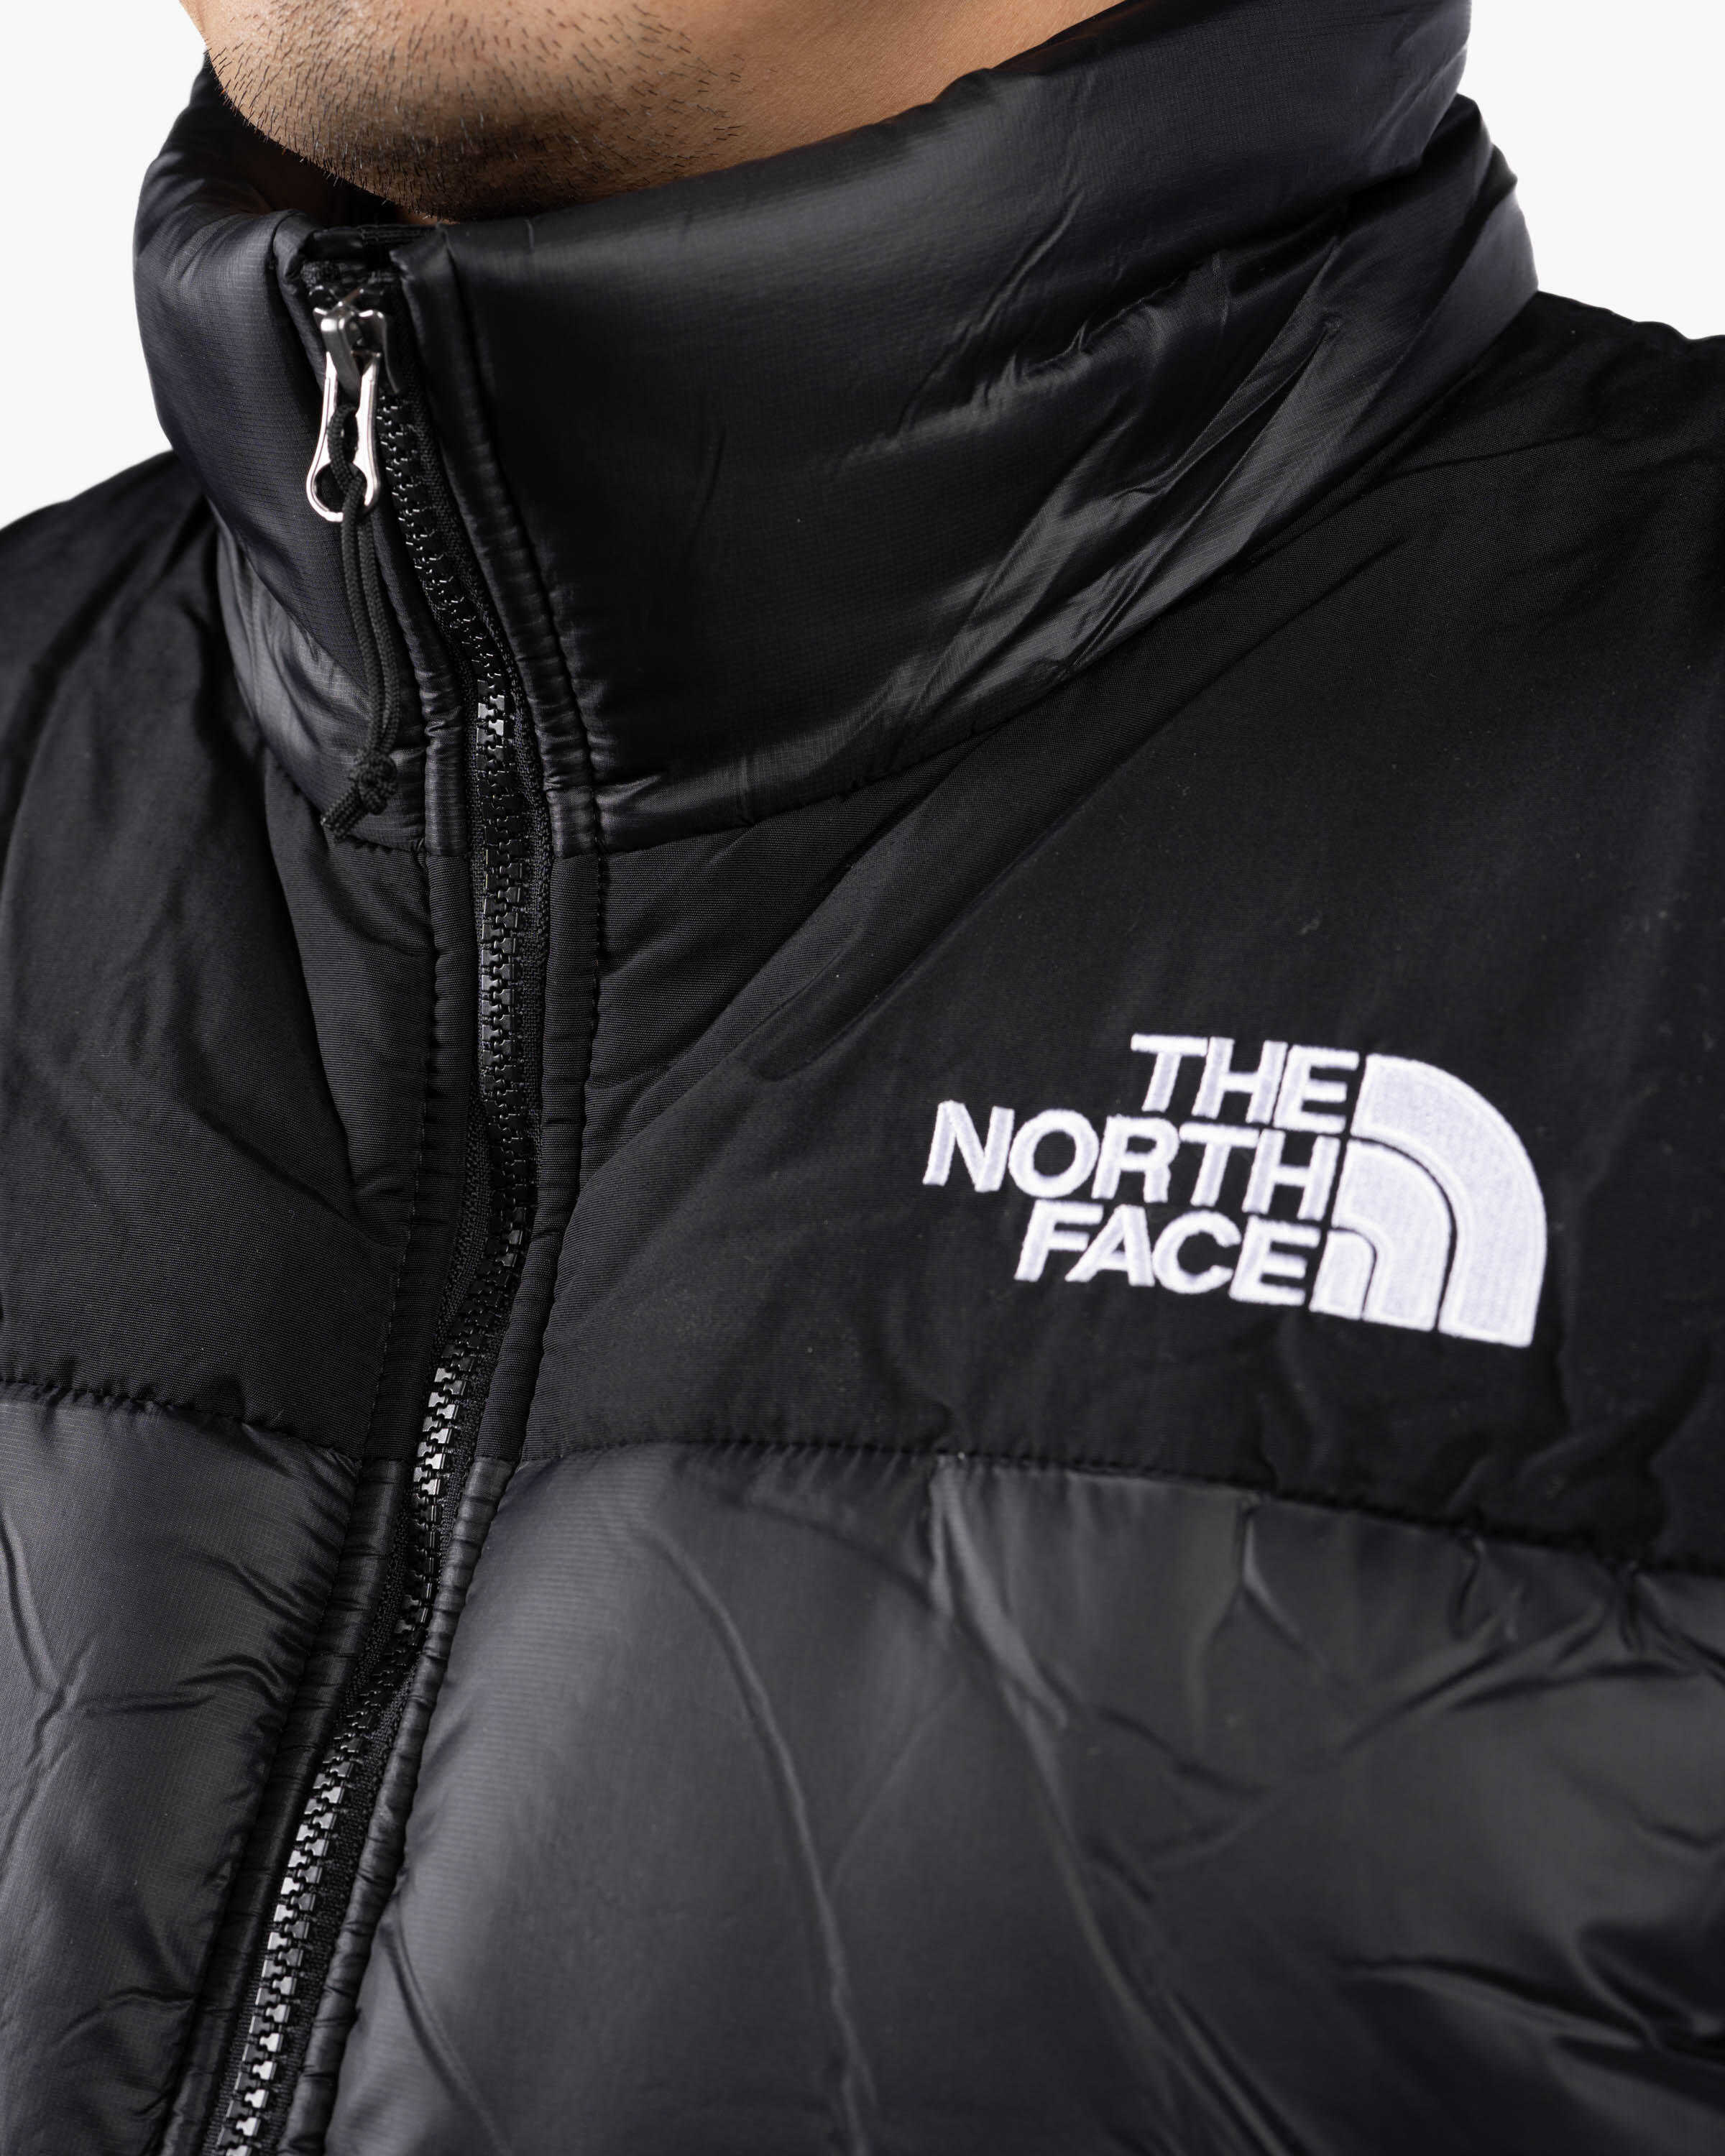 The North Face HIMALAYAN INSULATED VEST